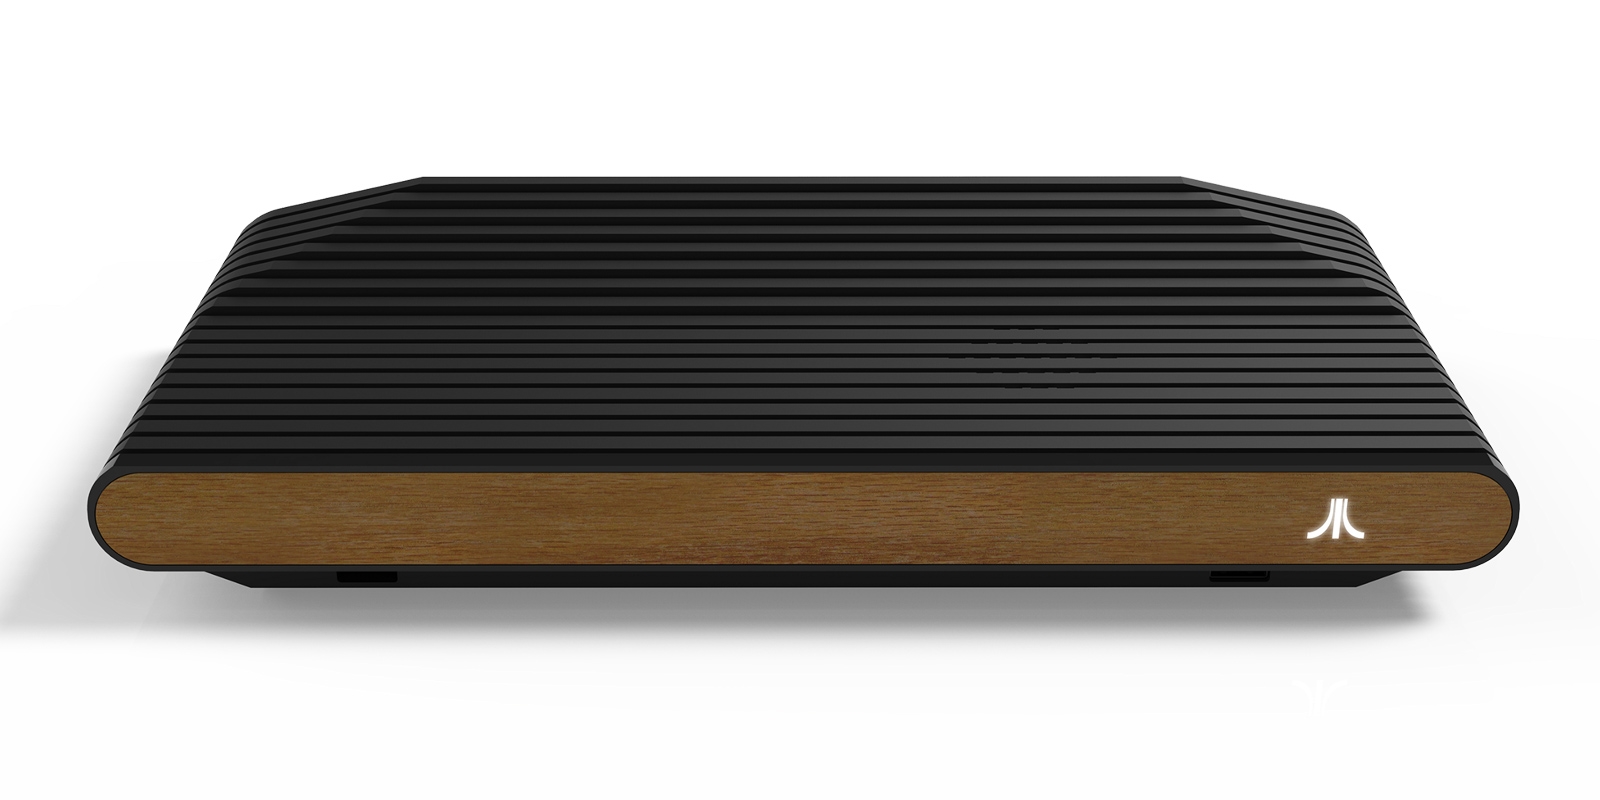 Atari VCS backers should get their consoles 'very soon' | DeviceDaily.com